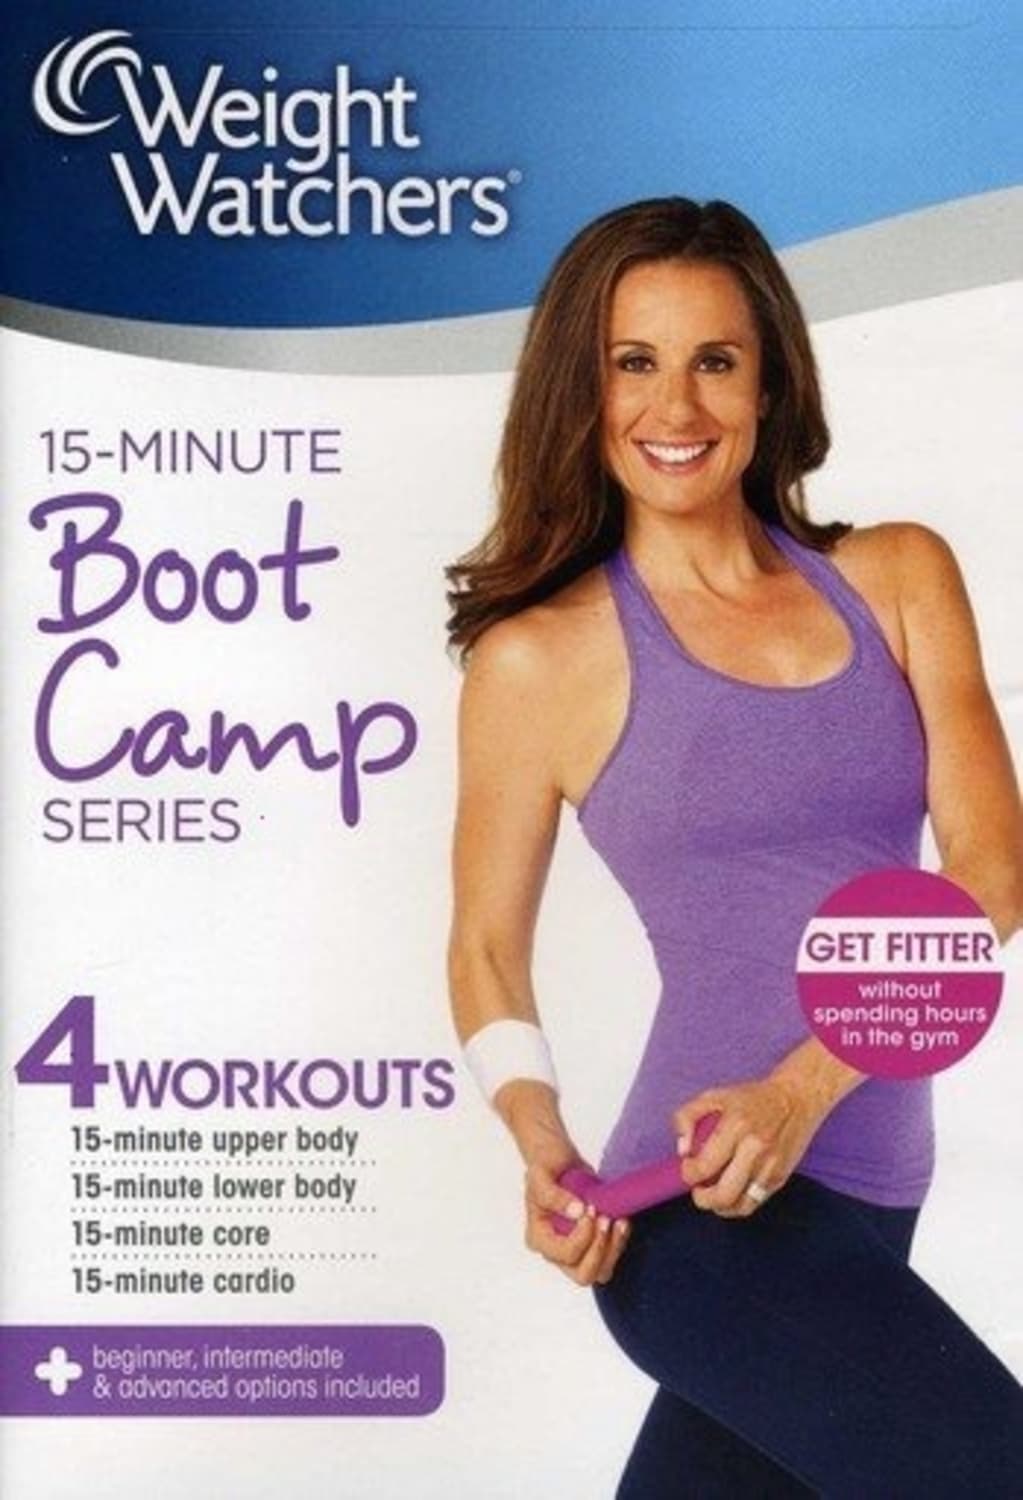 Weight Watchers: 15-Minute Boot Camp Series (DVD) on MovieShack